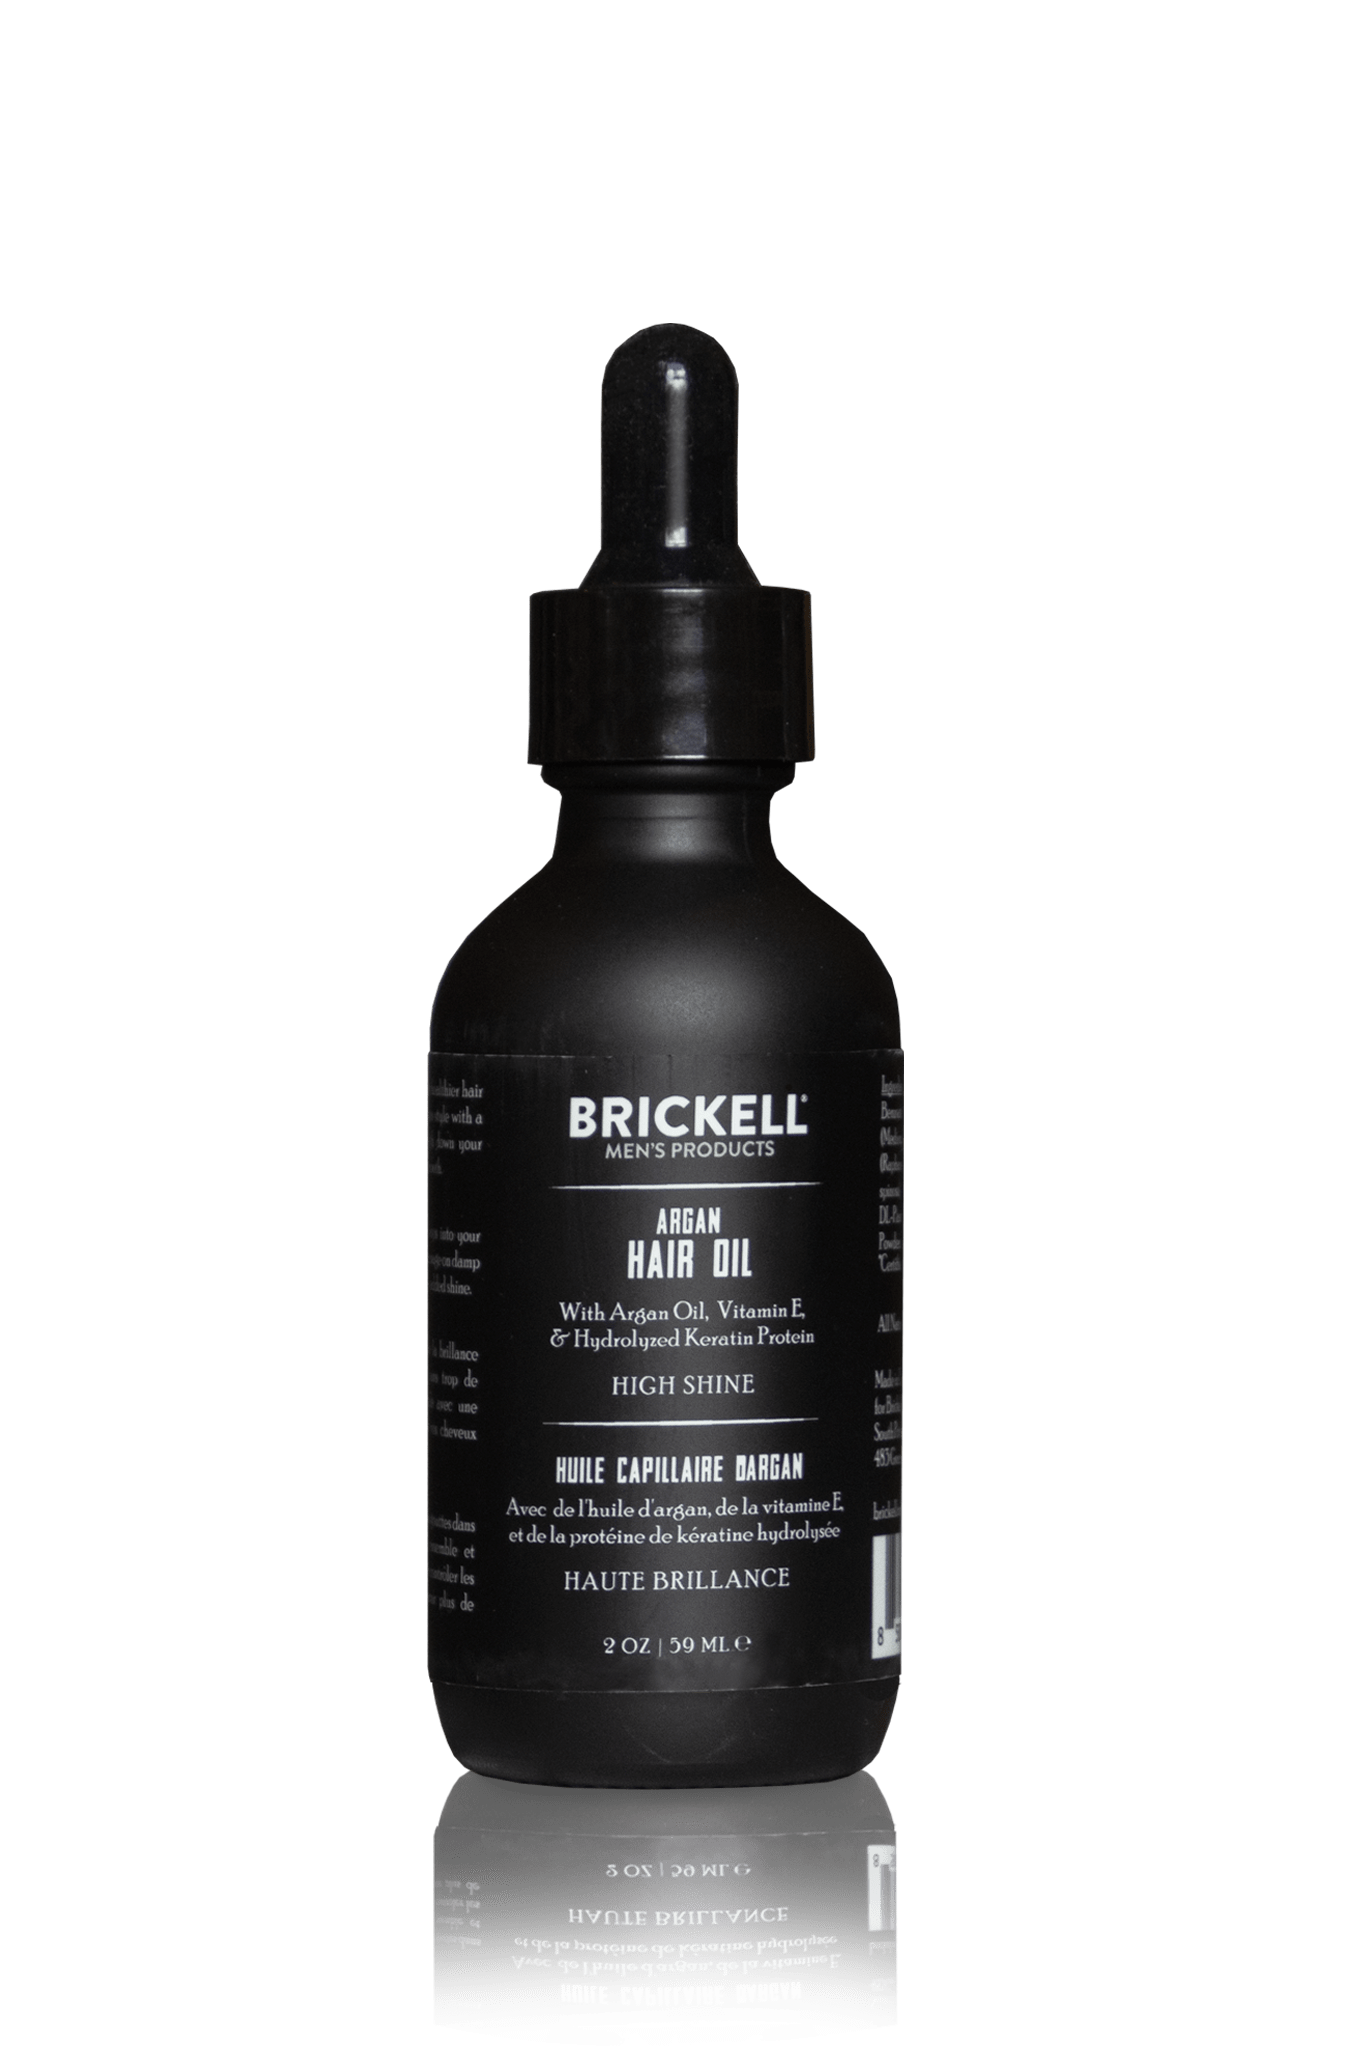 The Best All Natural Argan Hair Oil For Men | Brickell Men's Products ...